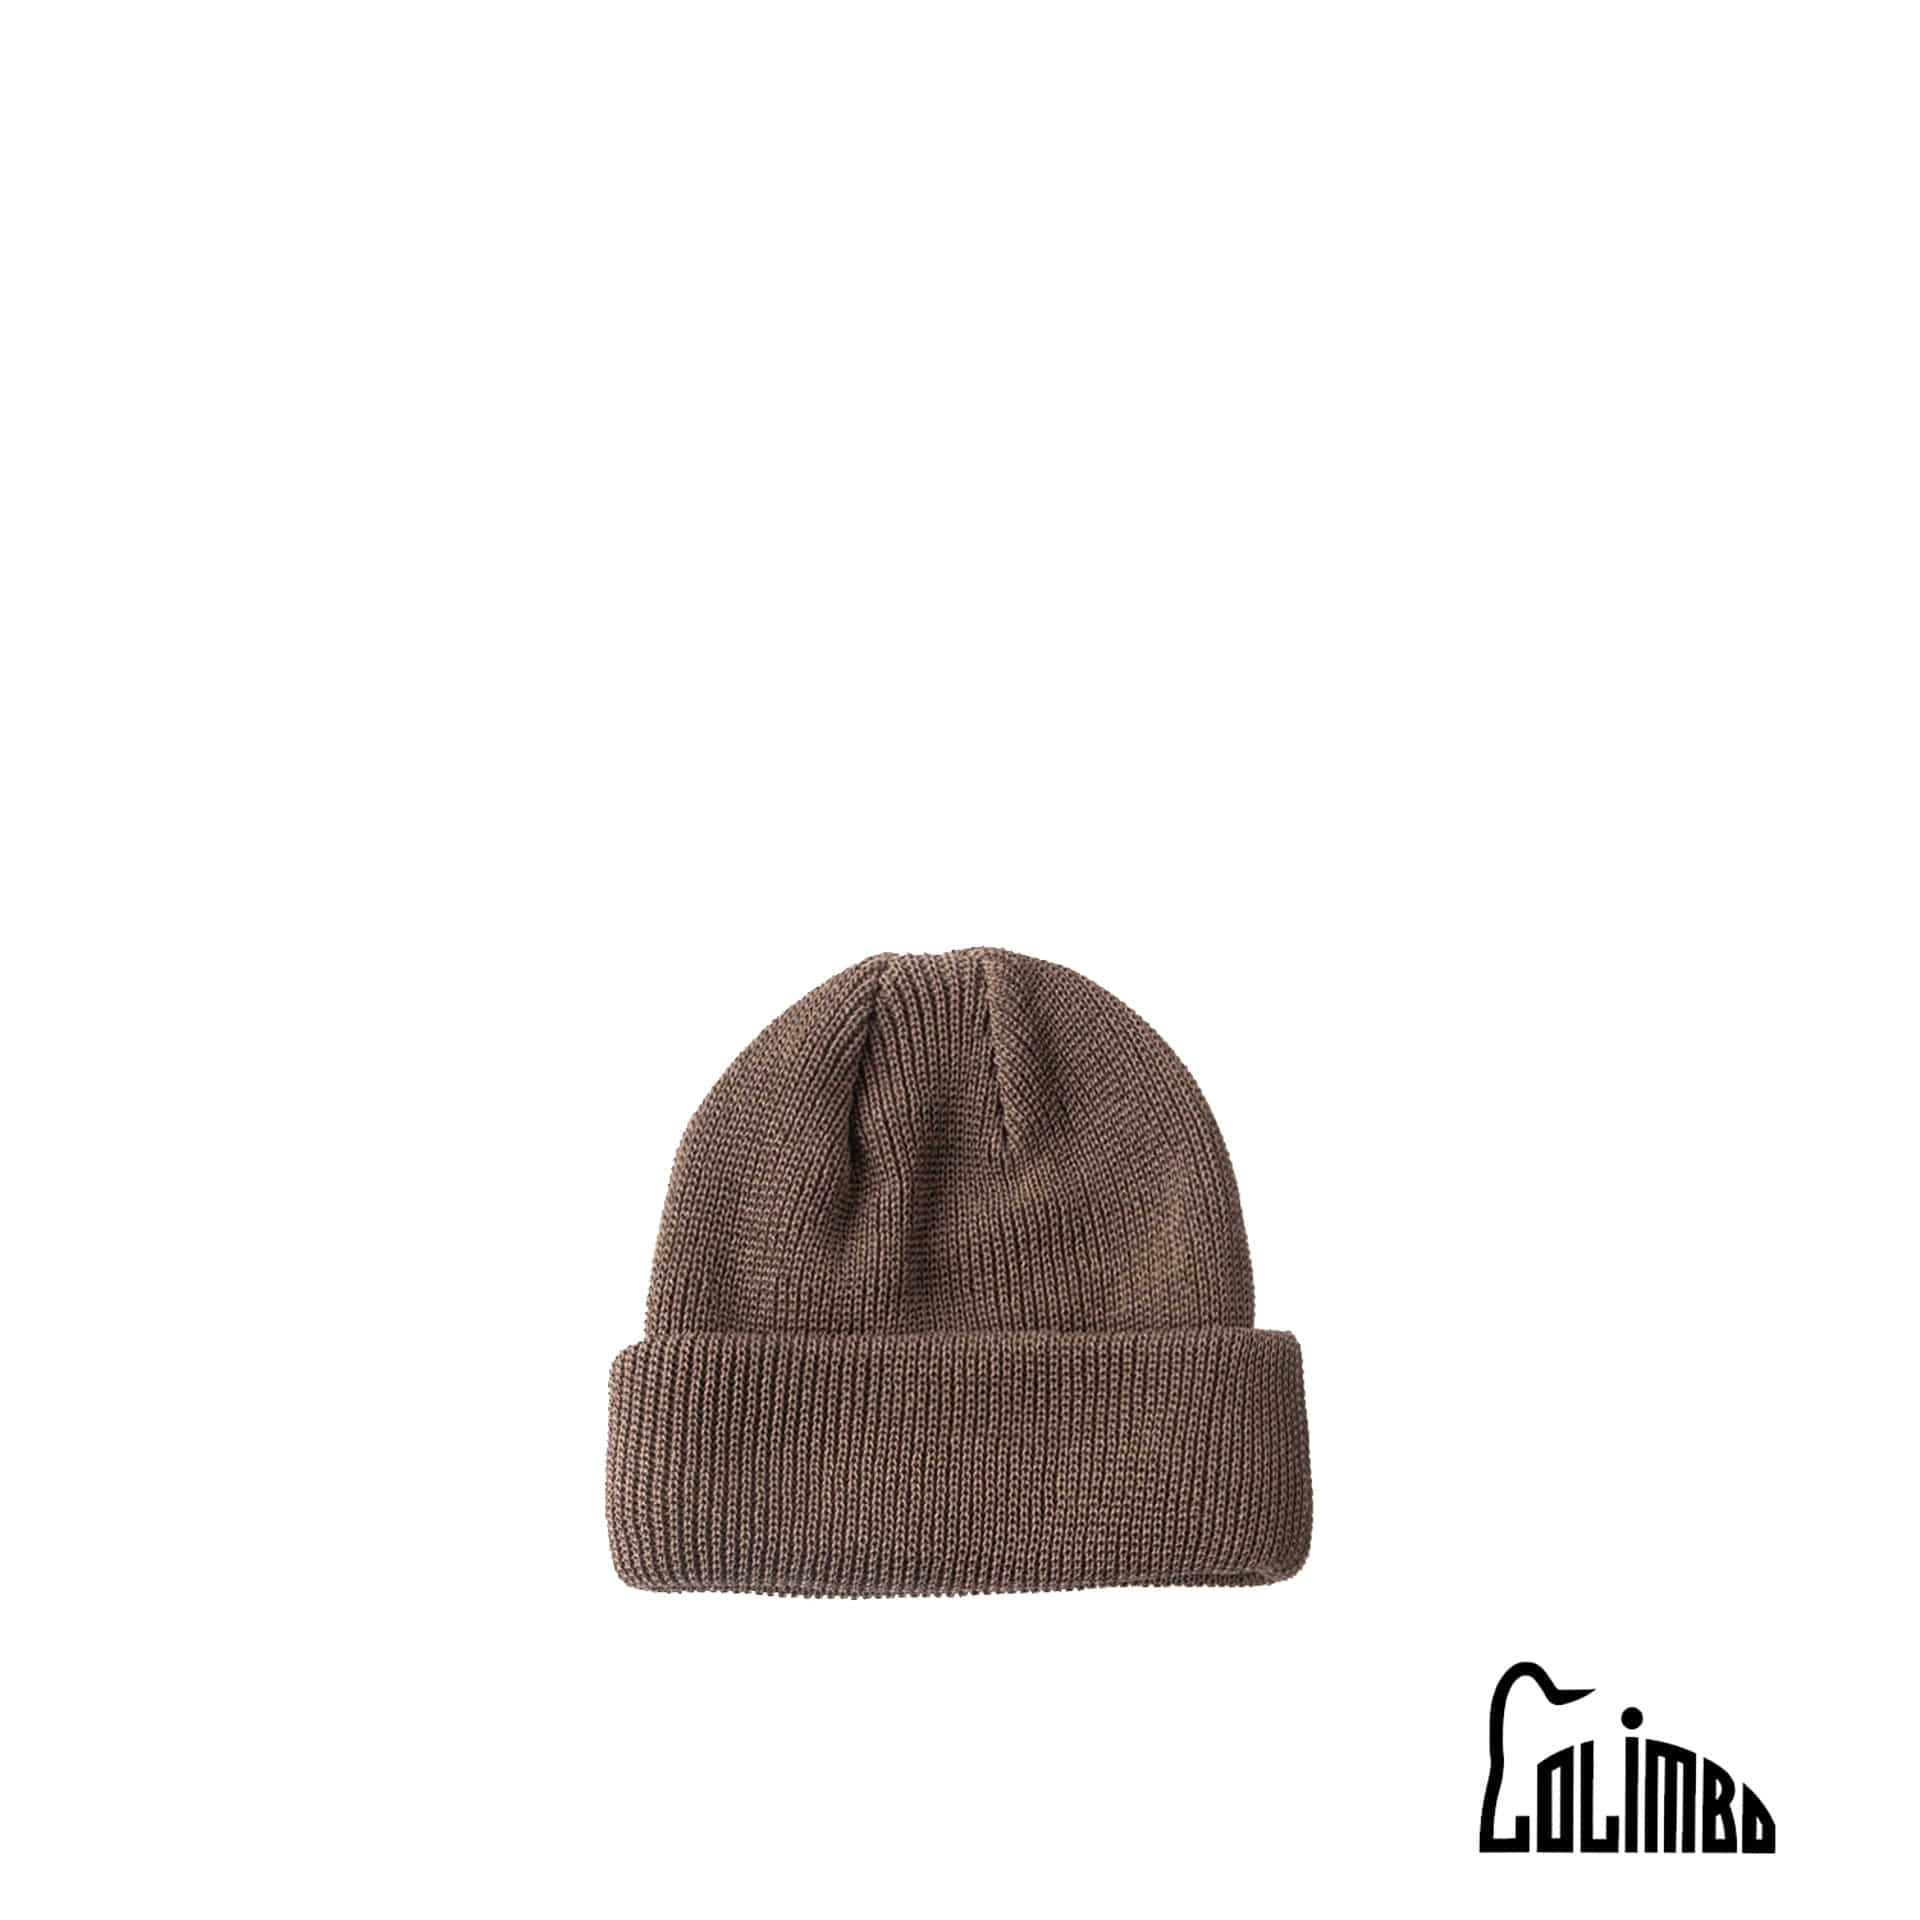 SOUTH FORK COTTON KNIT CAP (Cocoa Brown)